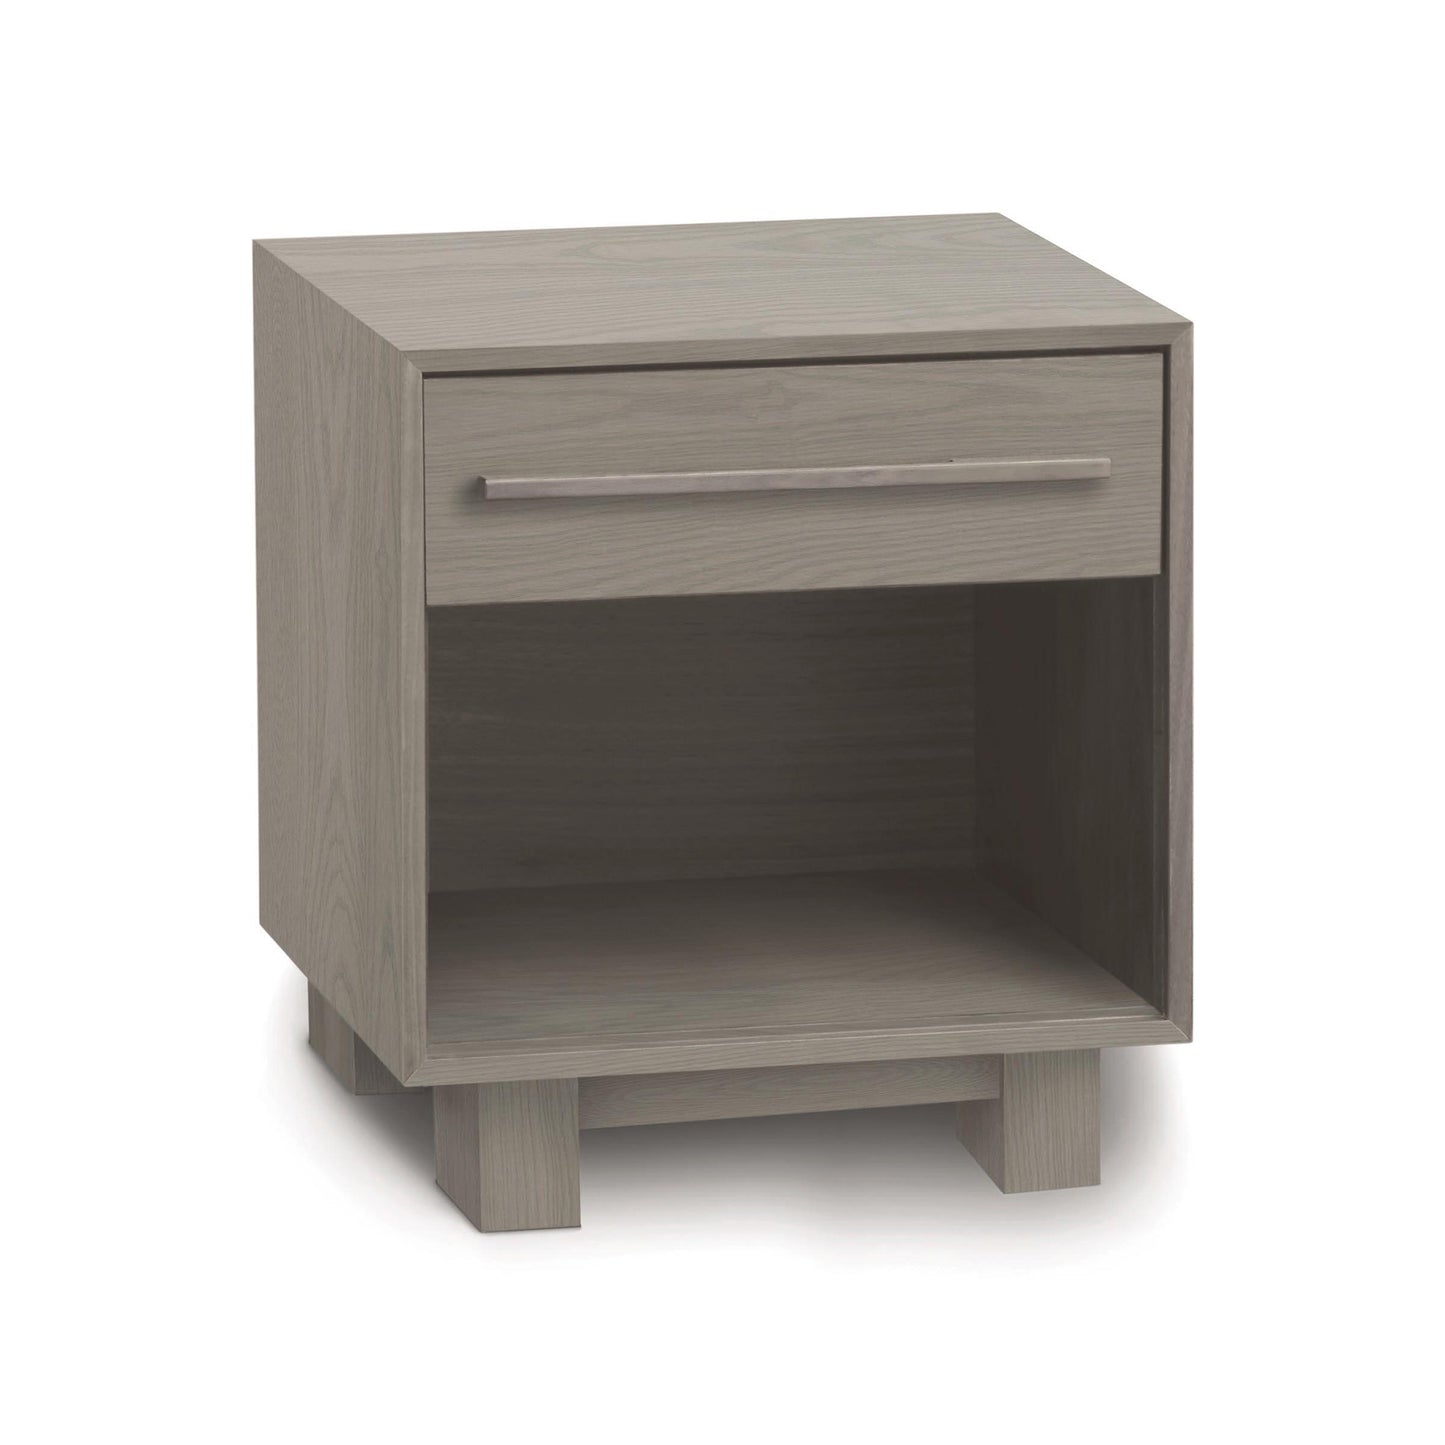 A modern, mid-century modern style Copeland Furniture Sloane 1-Drawer Nightstand in gray wood with one drawer and an open shelf, isolated on a white background.